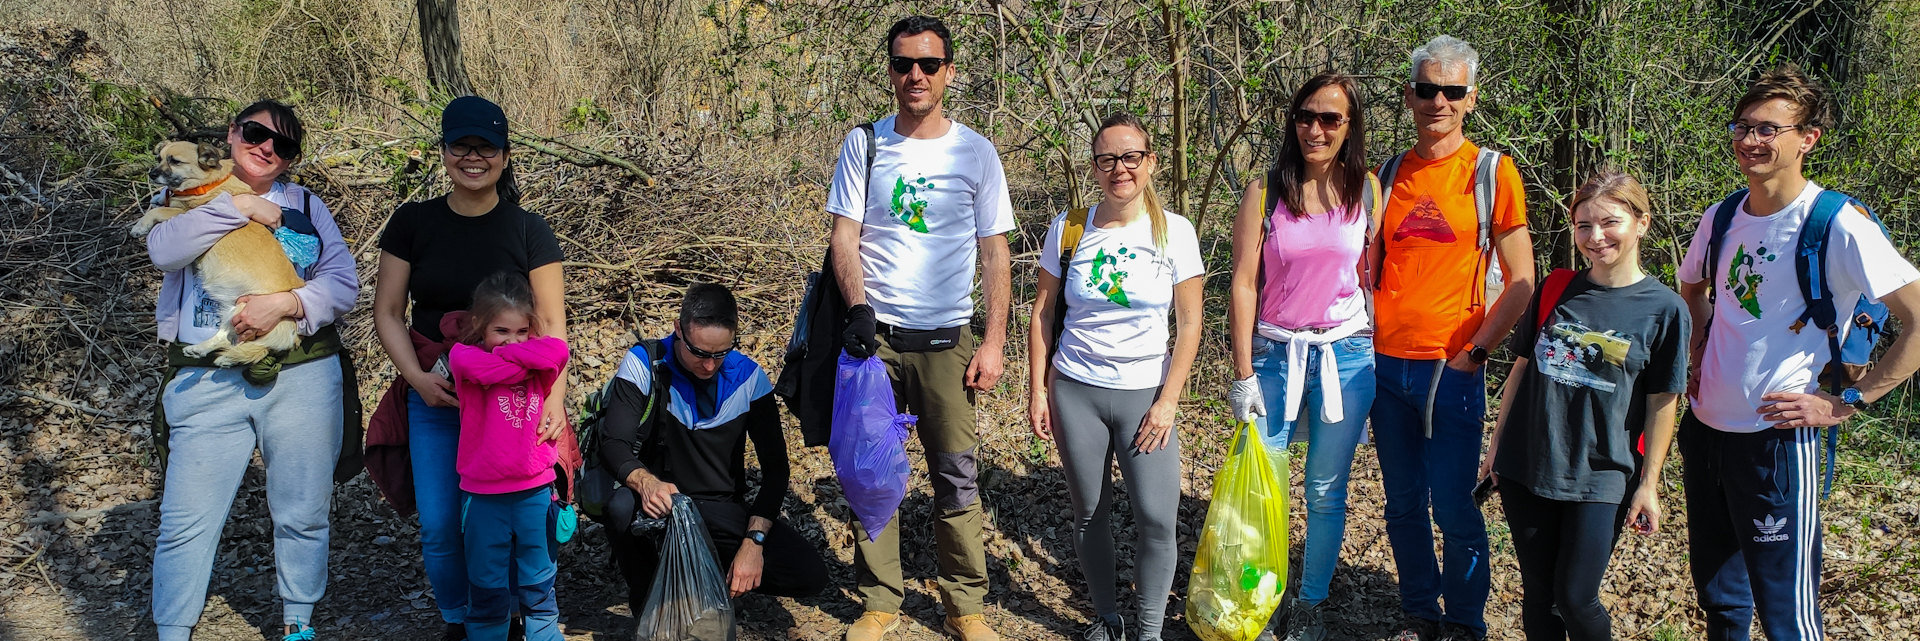 Lexmark Budapest Hiking and Collecting Garbage